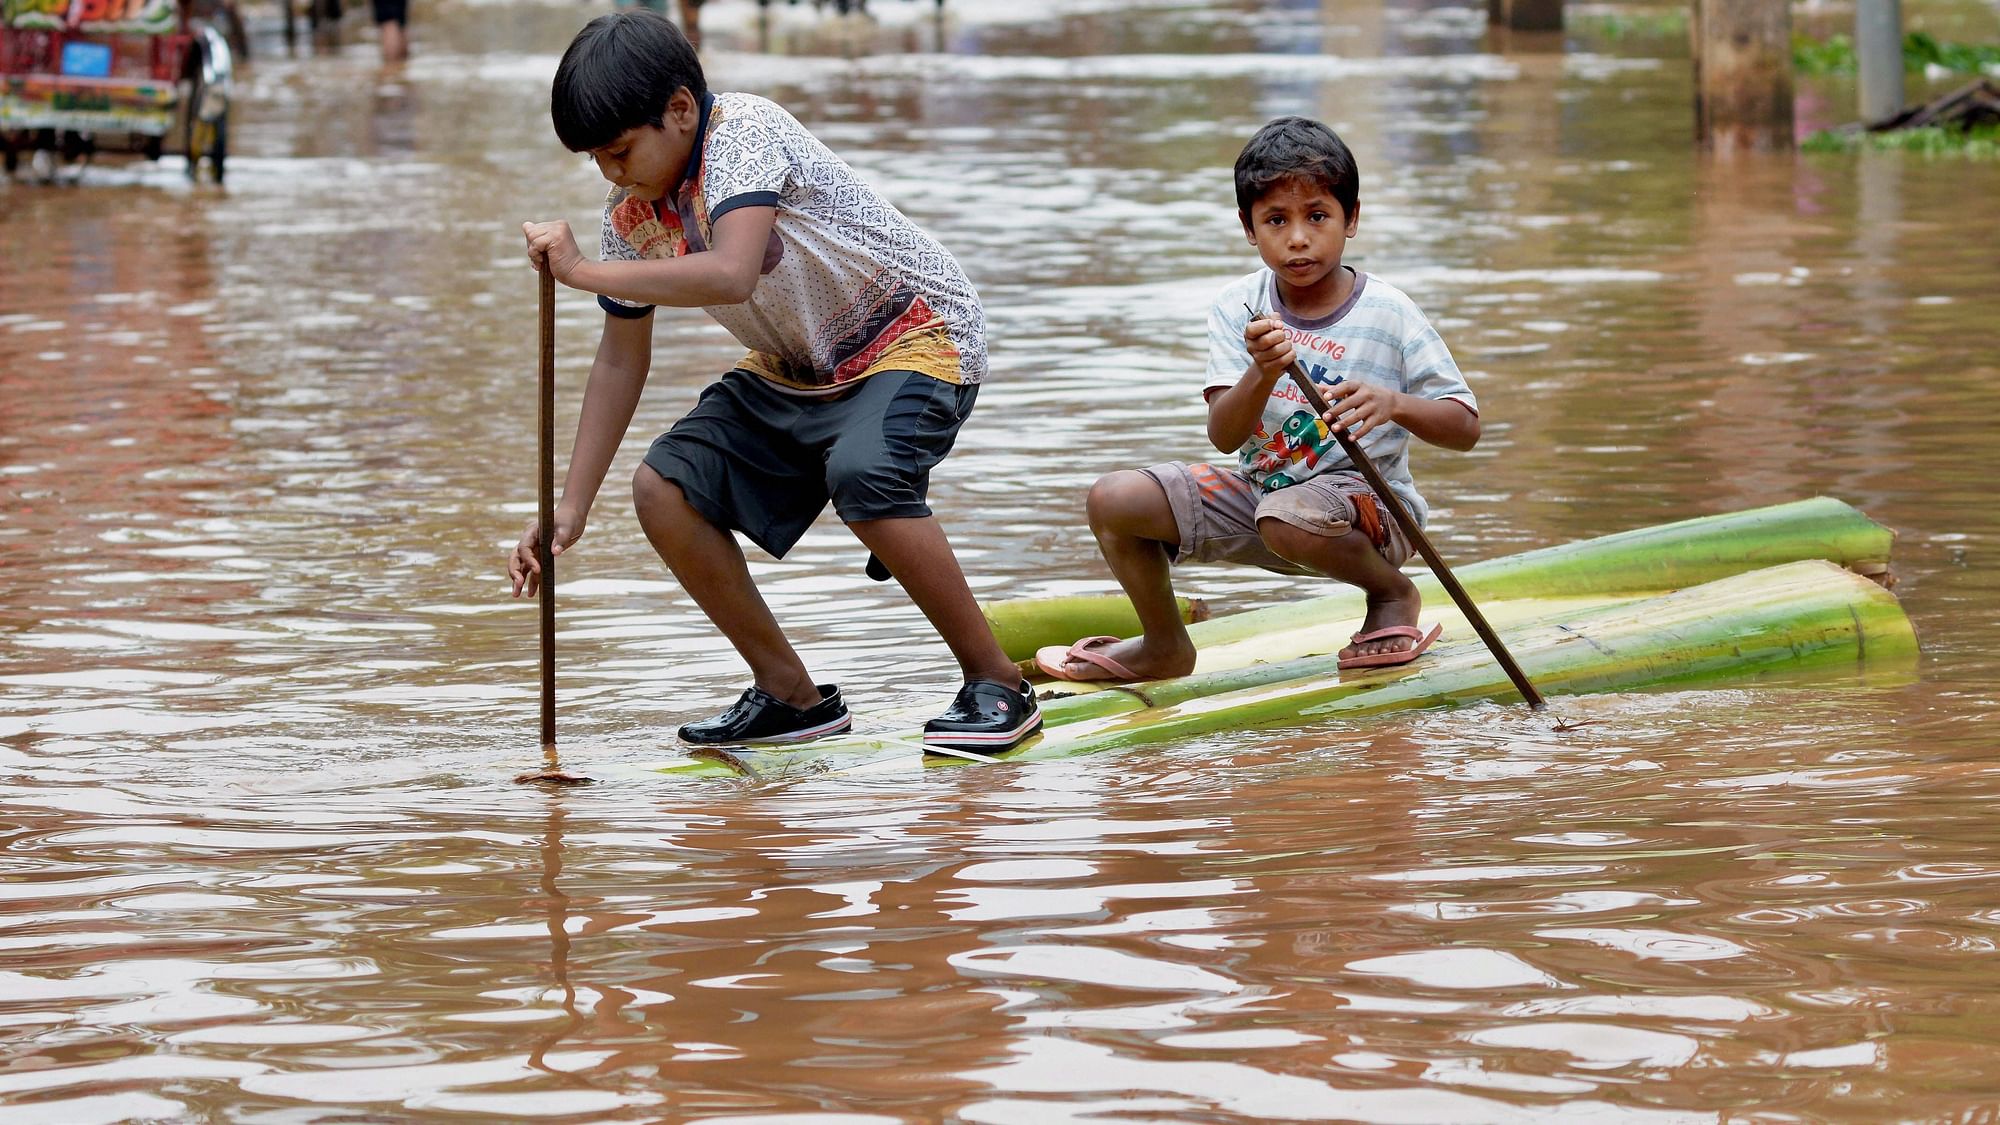 Image of two boys wading a flood street in Guwahati used for representation purpose.